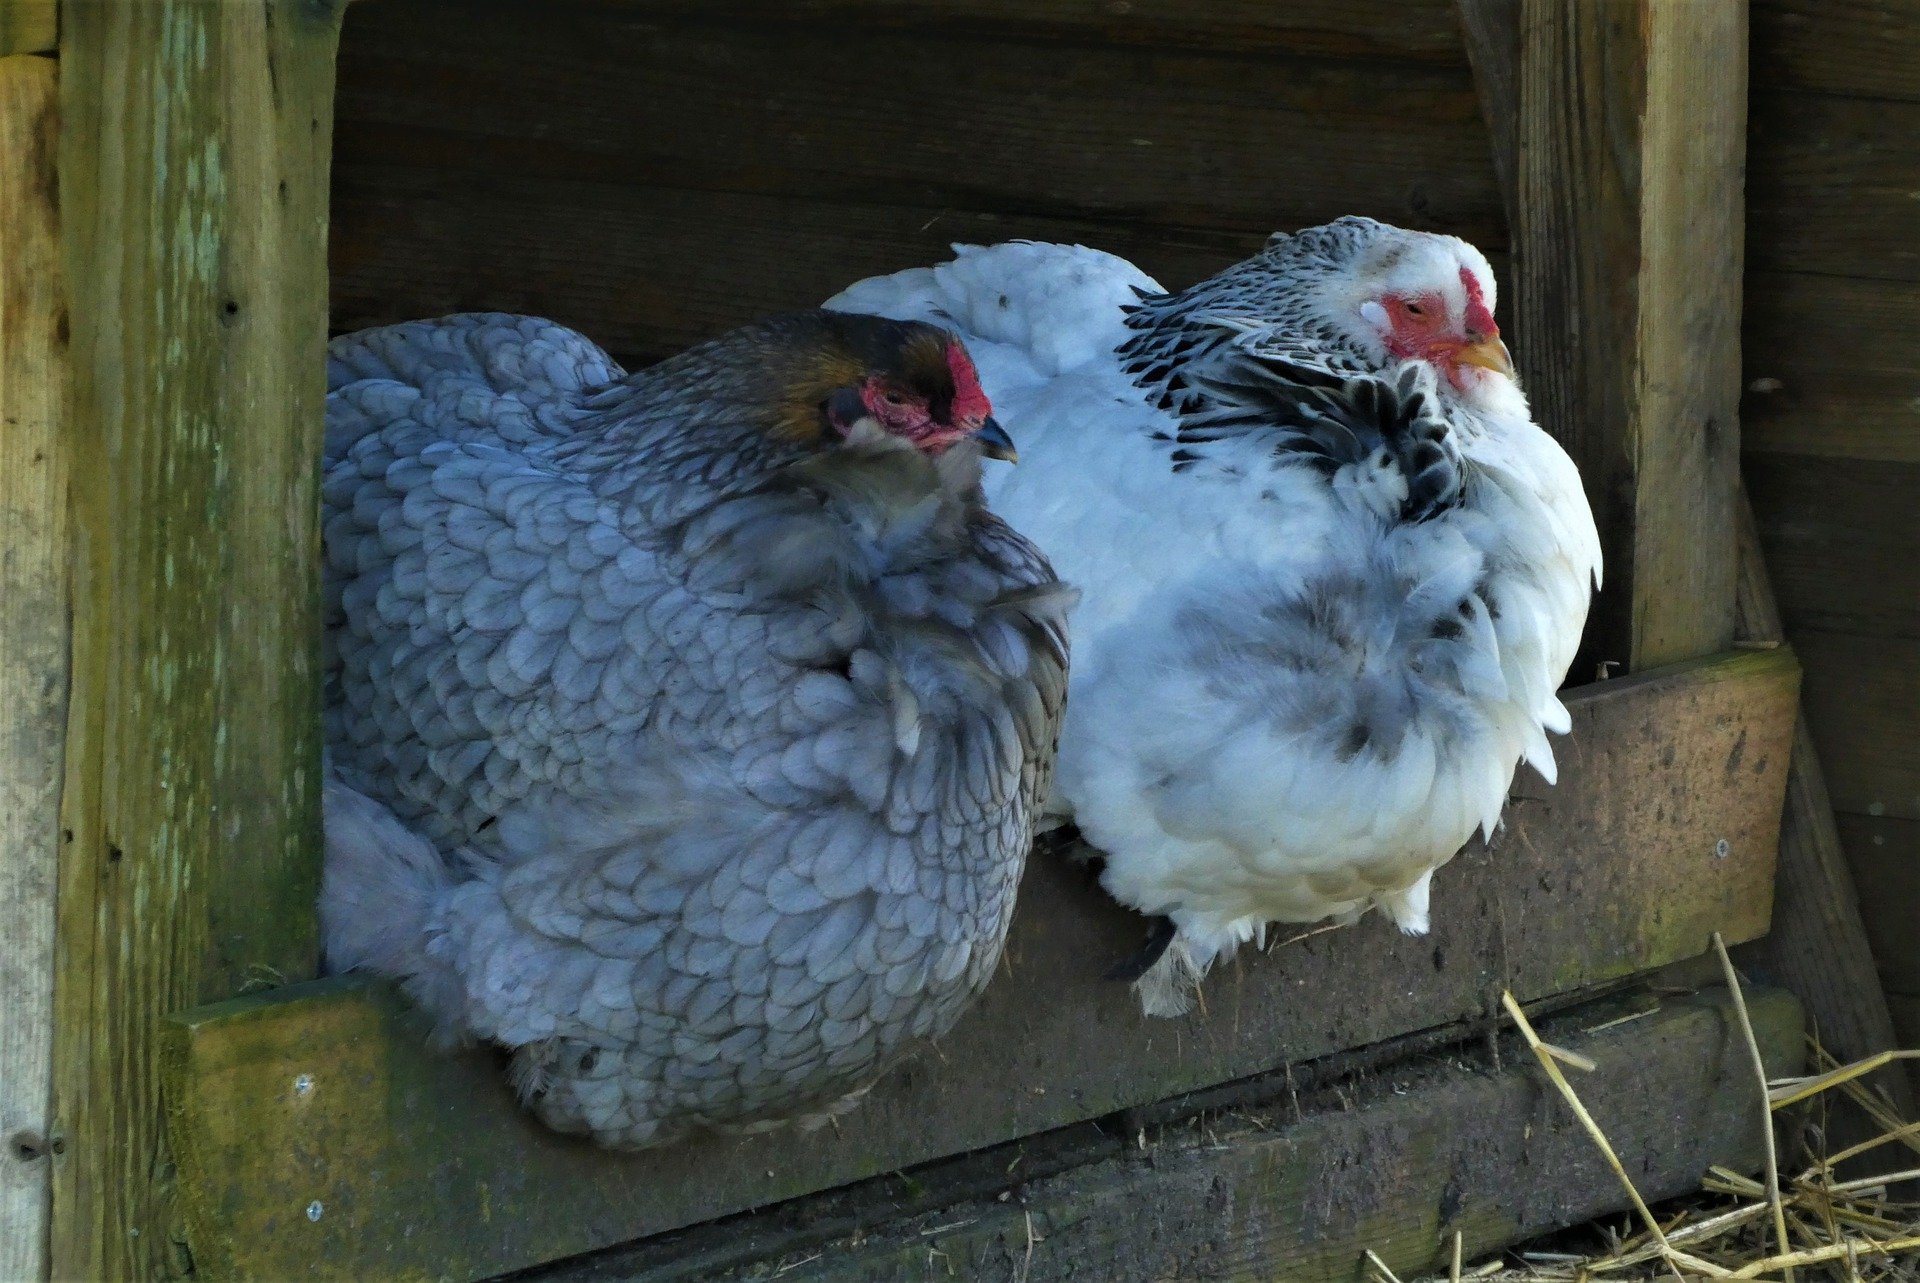 Pictured - Two chickens, brown and white sitting in a chicken coop | Source: Pixabay 